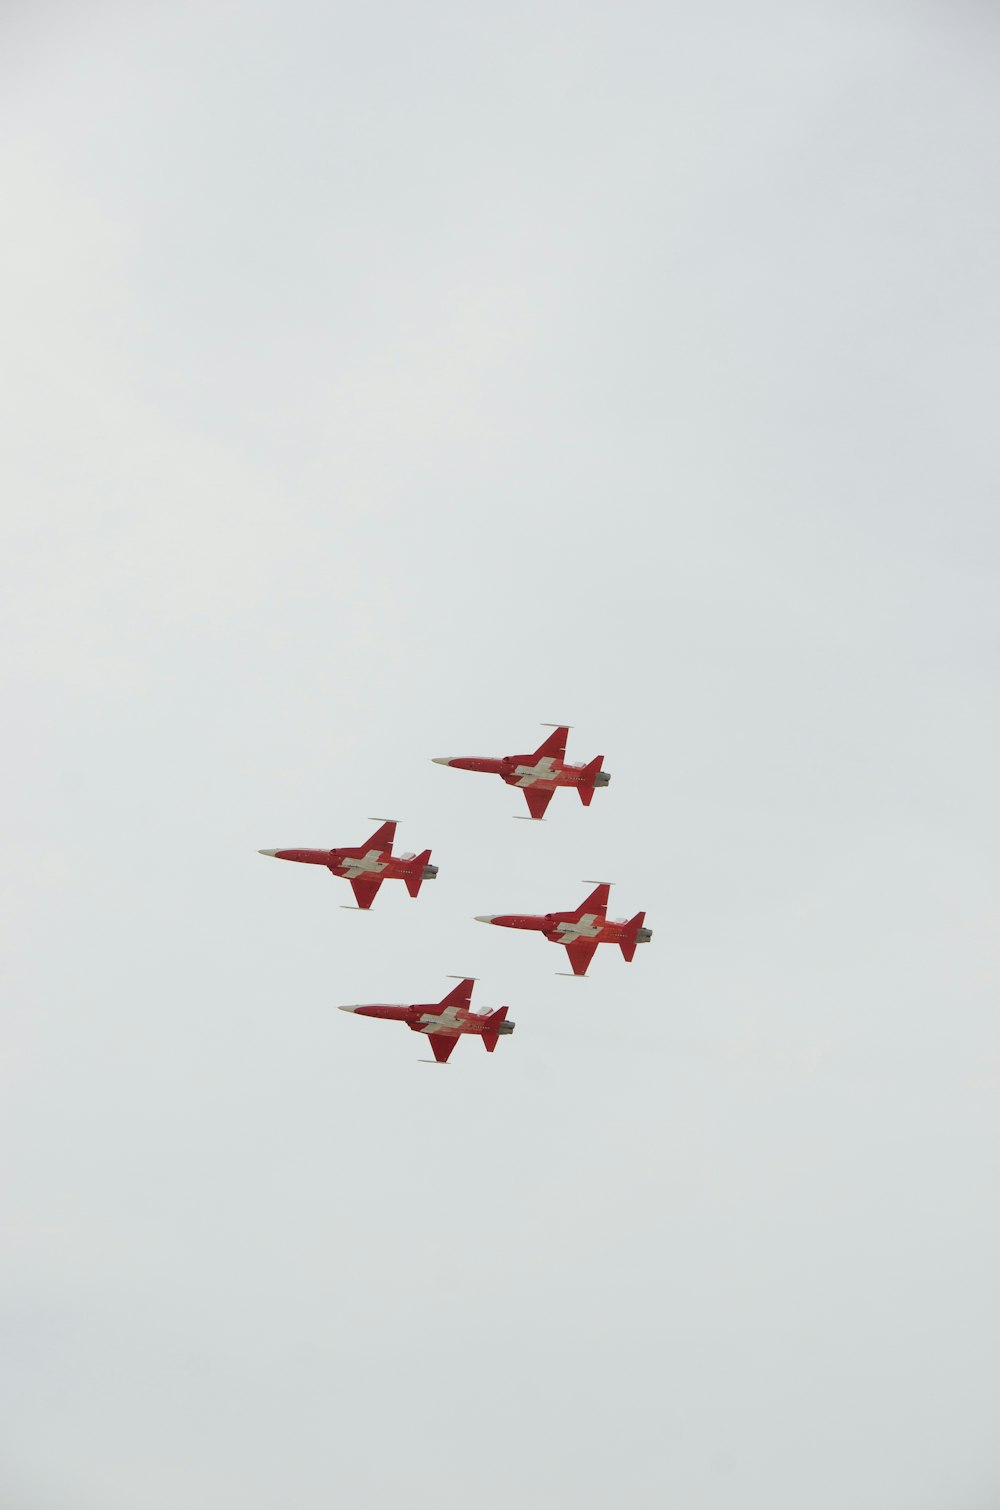 a group of red fighter jets flying through a cloudy sky